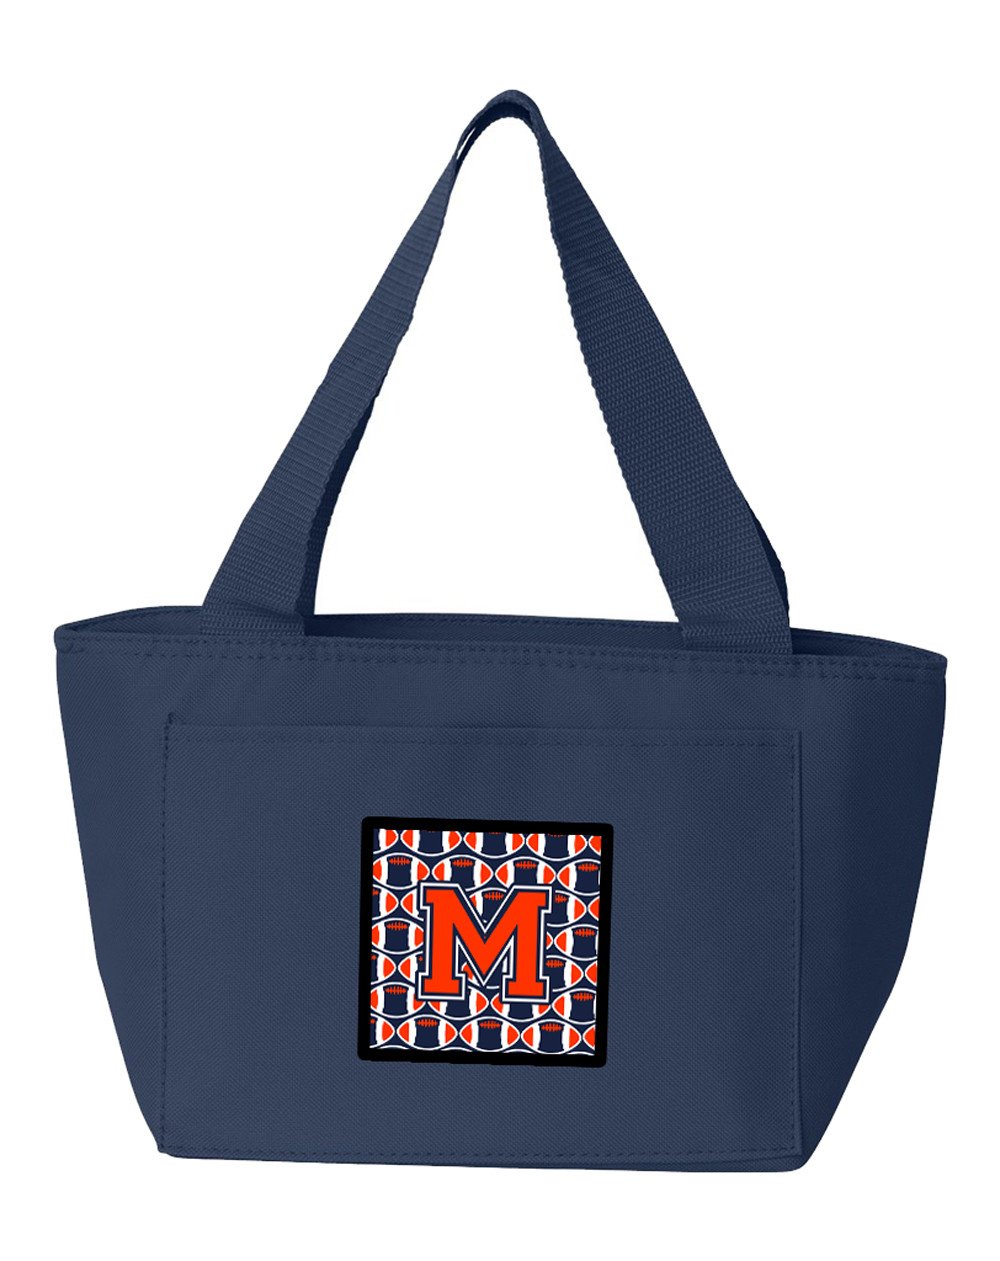 Letter M Football Orange, Blue and white Lunch Bag CJ1066-MNA-8808 by Caroline's Treasures